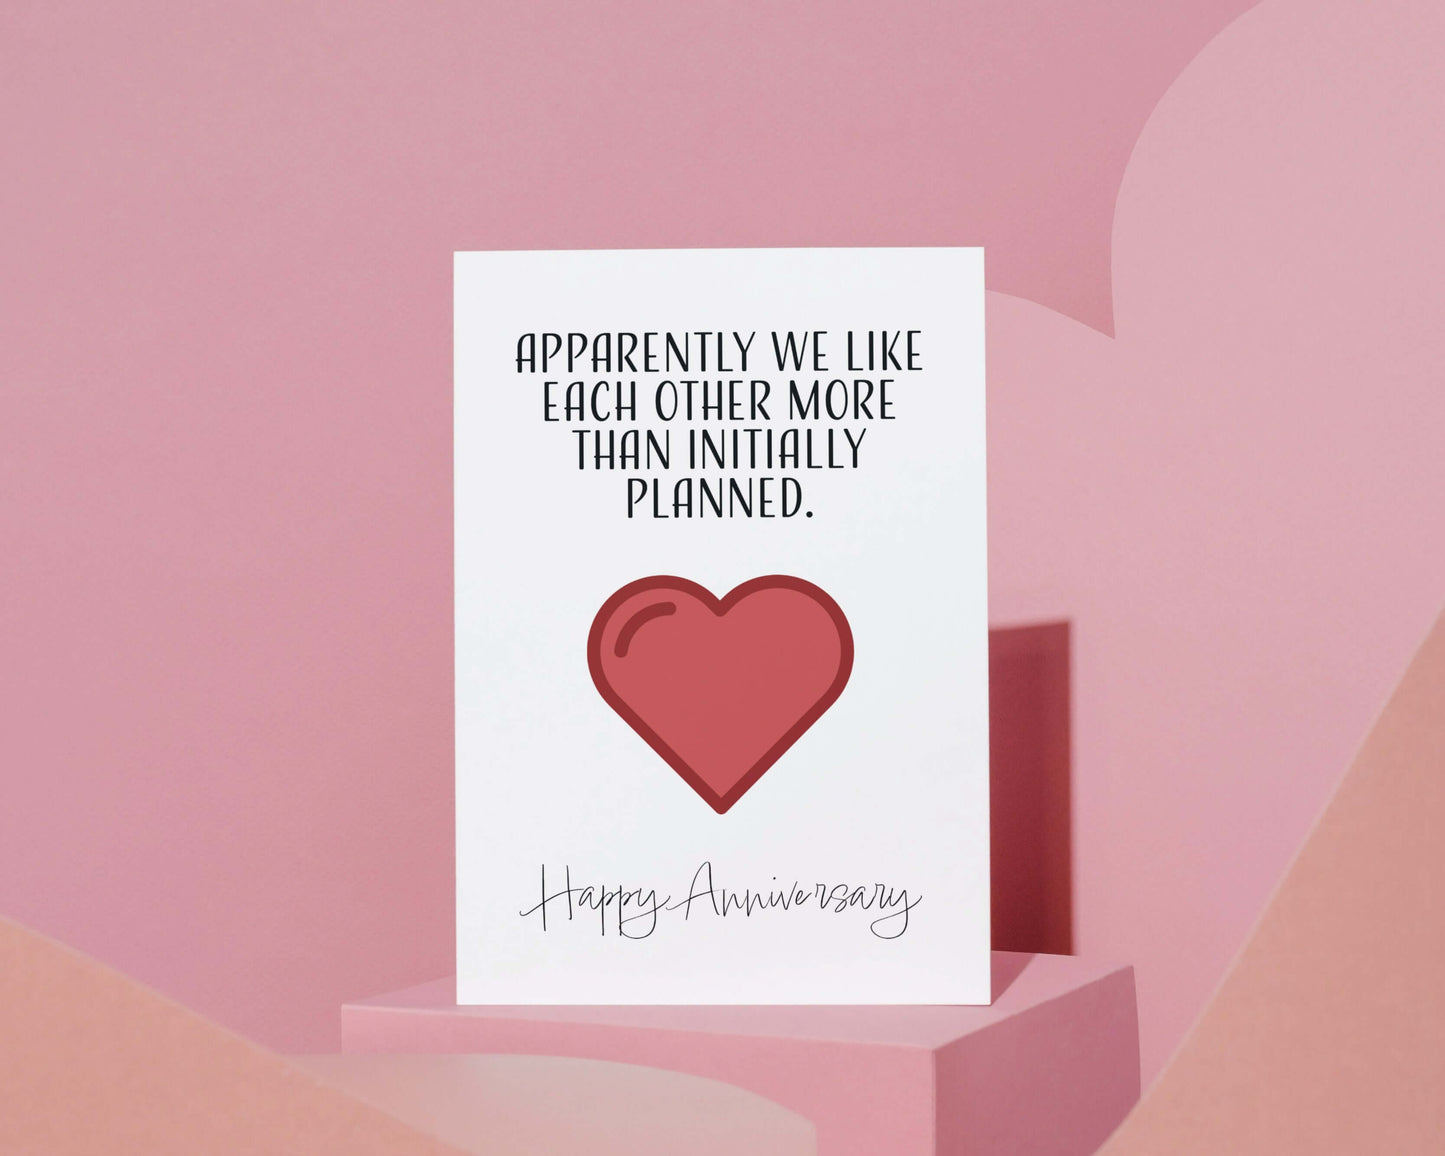 The Card Store UK's Apparently We Like Each Other More Than Planned | Funny Anniversary Card | Funny Rude Wedding Relationship Anniversary Greeting Card, Anniversary Cards for £3.50 each